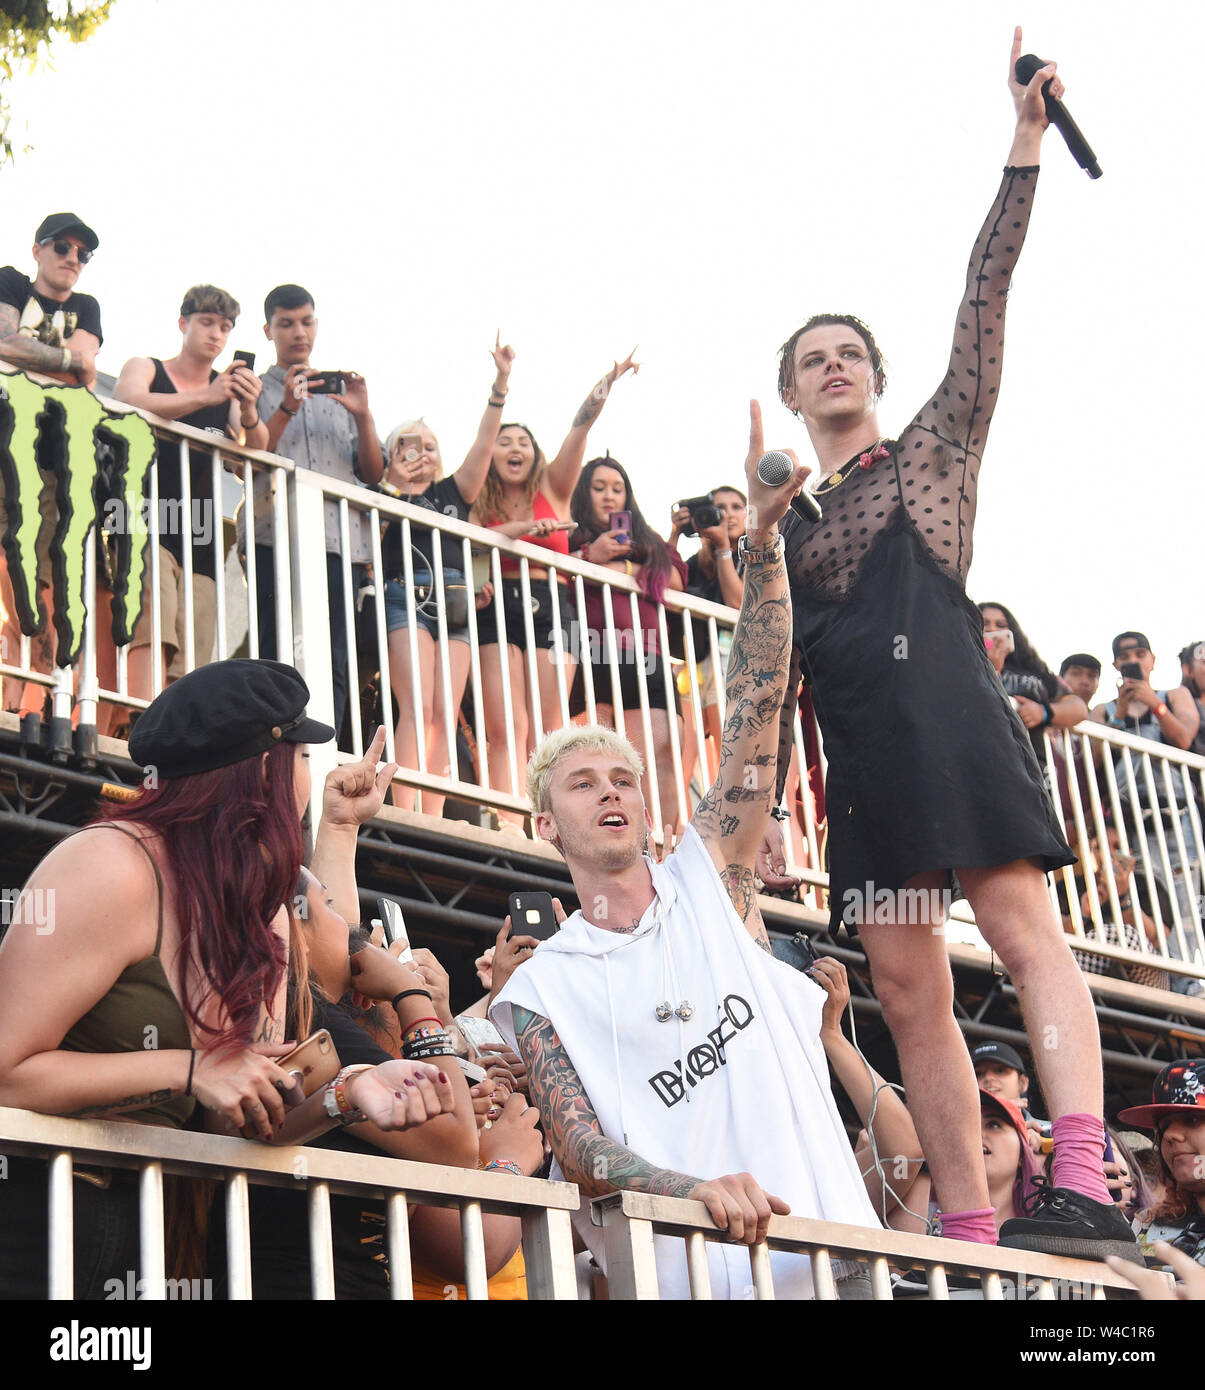 California, USA. 21st July, 2019. Machine Gun Kelly and YUNGBLUD perform  int eh crowd during the Vans Warped Tour 25th Anniversary on July 21, 2019  in Mountain View, California. Credit: MediaPunch Inc/Alamy